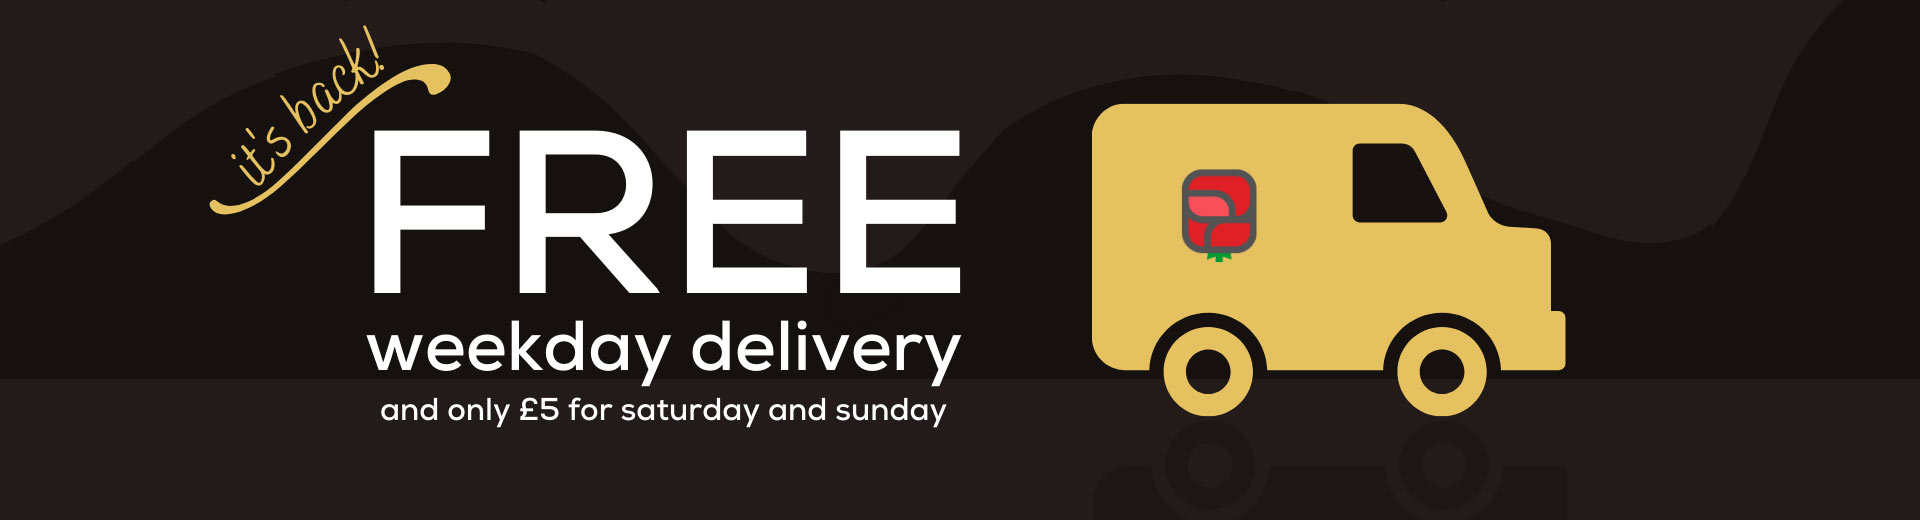 Free weekday delivery and only Â£5 for weekend delivery